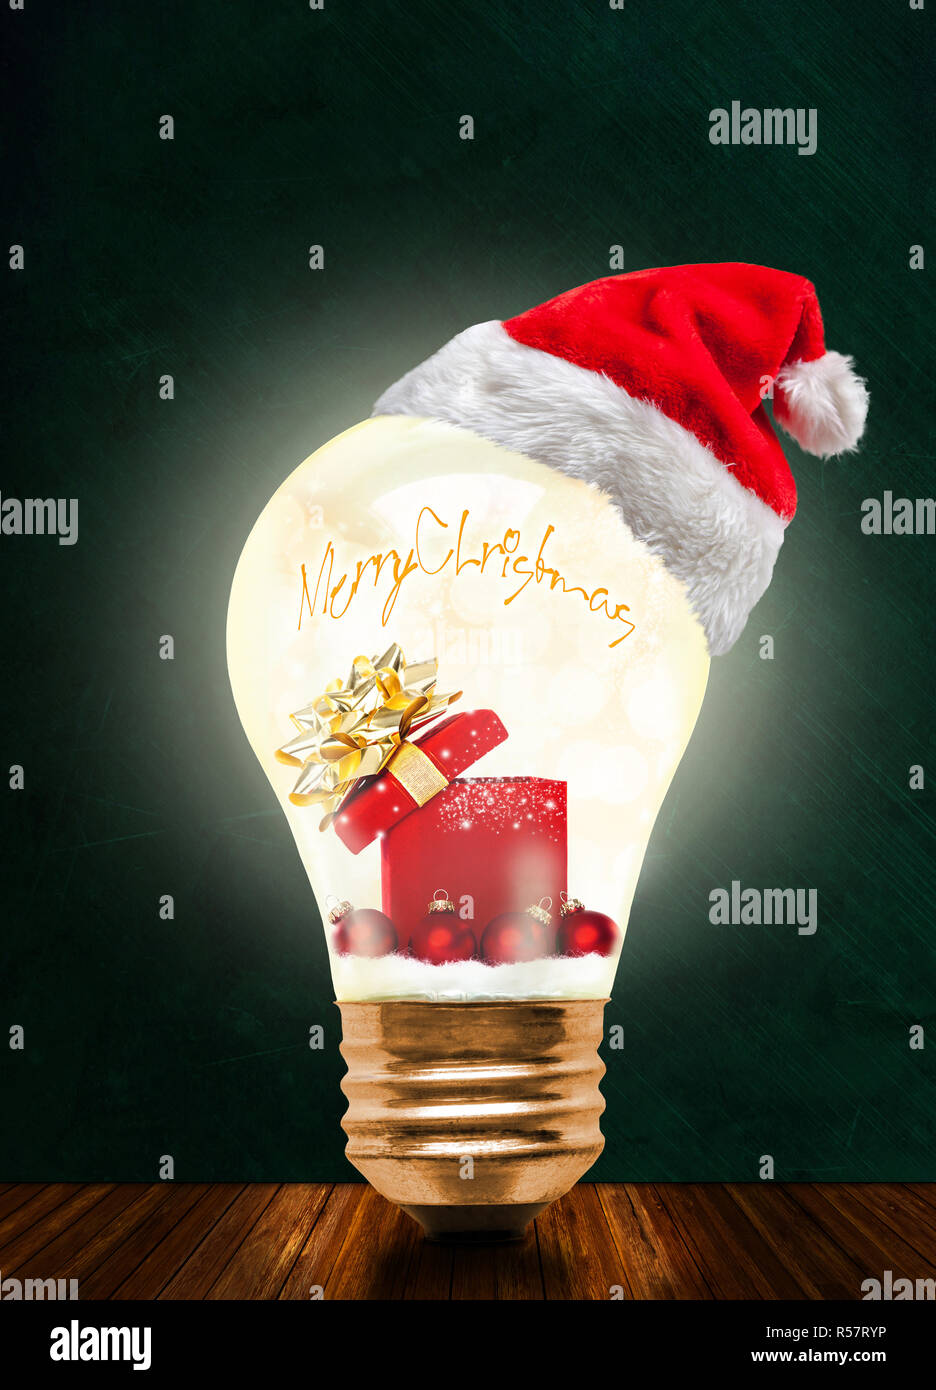 Glowing light bulb wearing Santa hat with Merry Christmas message and magical gift box and baubles with copy space. Glowing Xmas and season of sharing Stock Photo